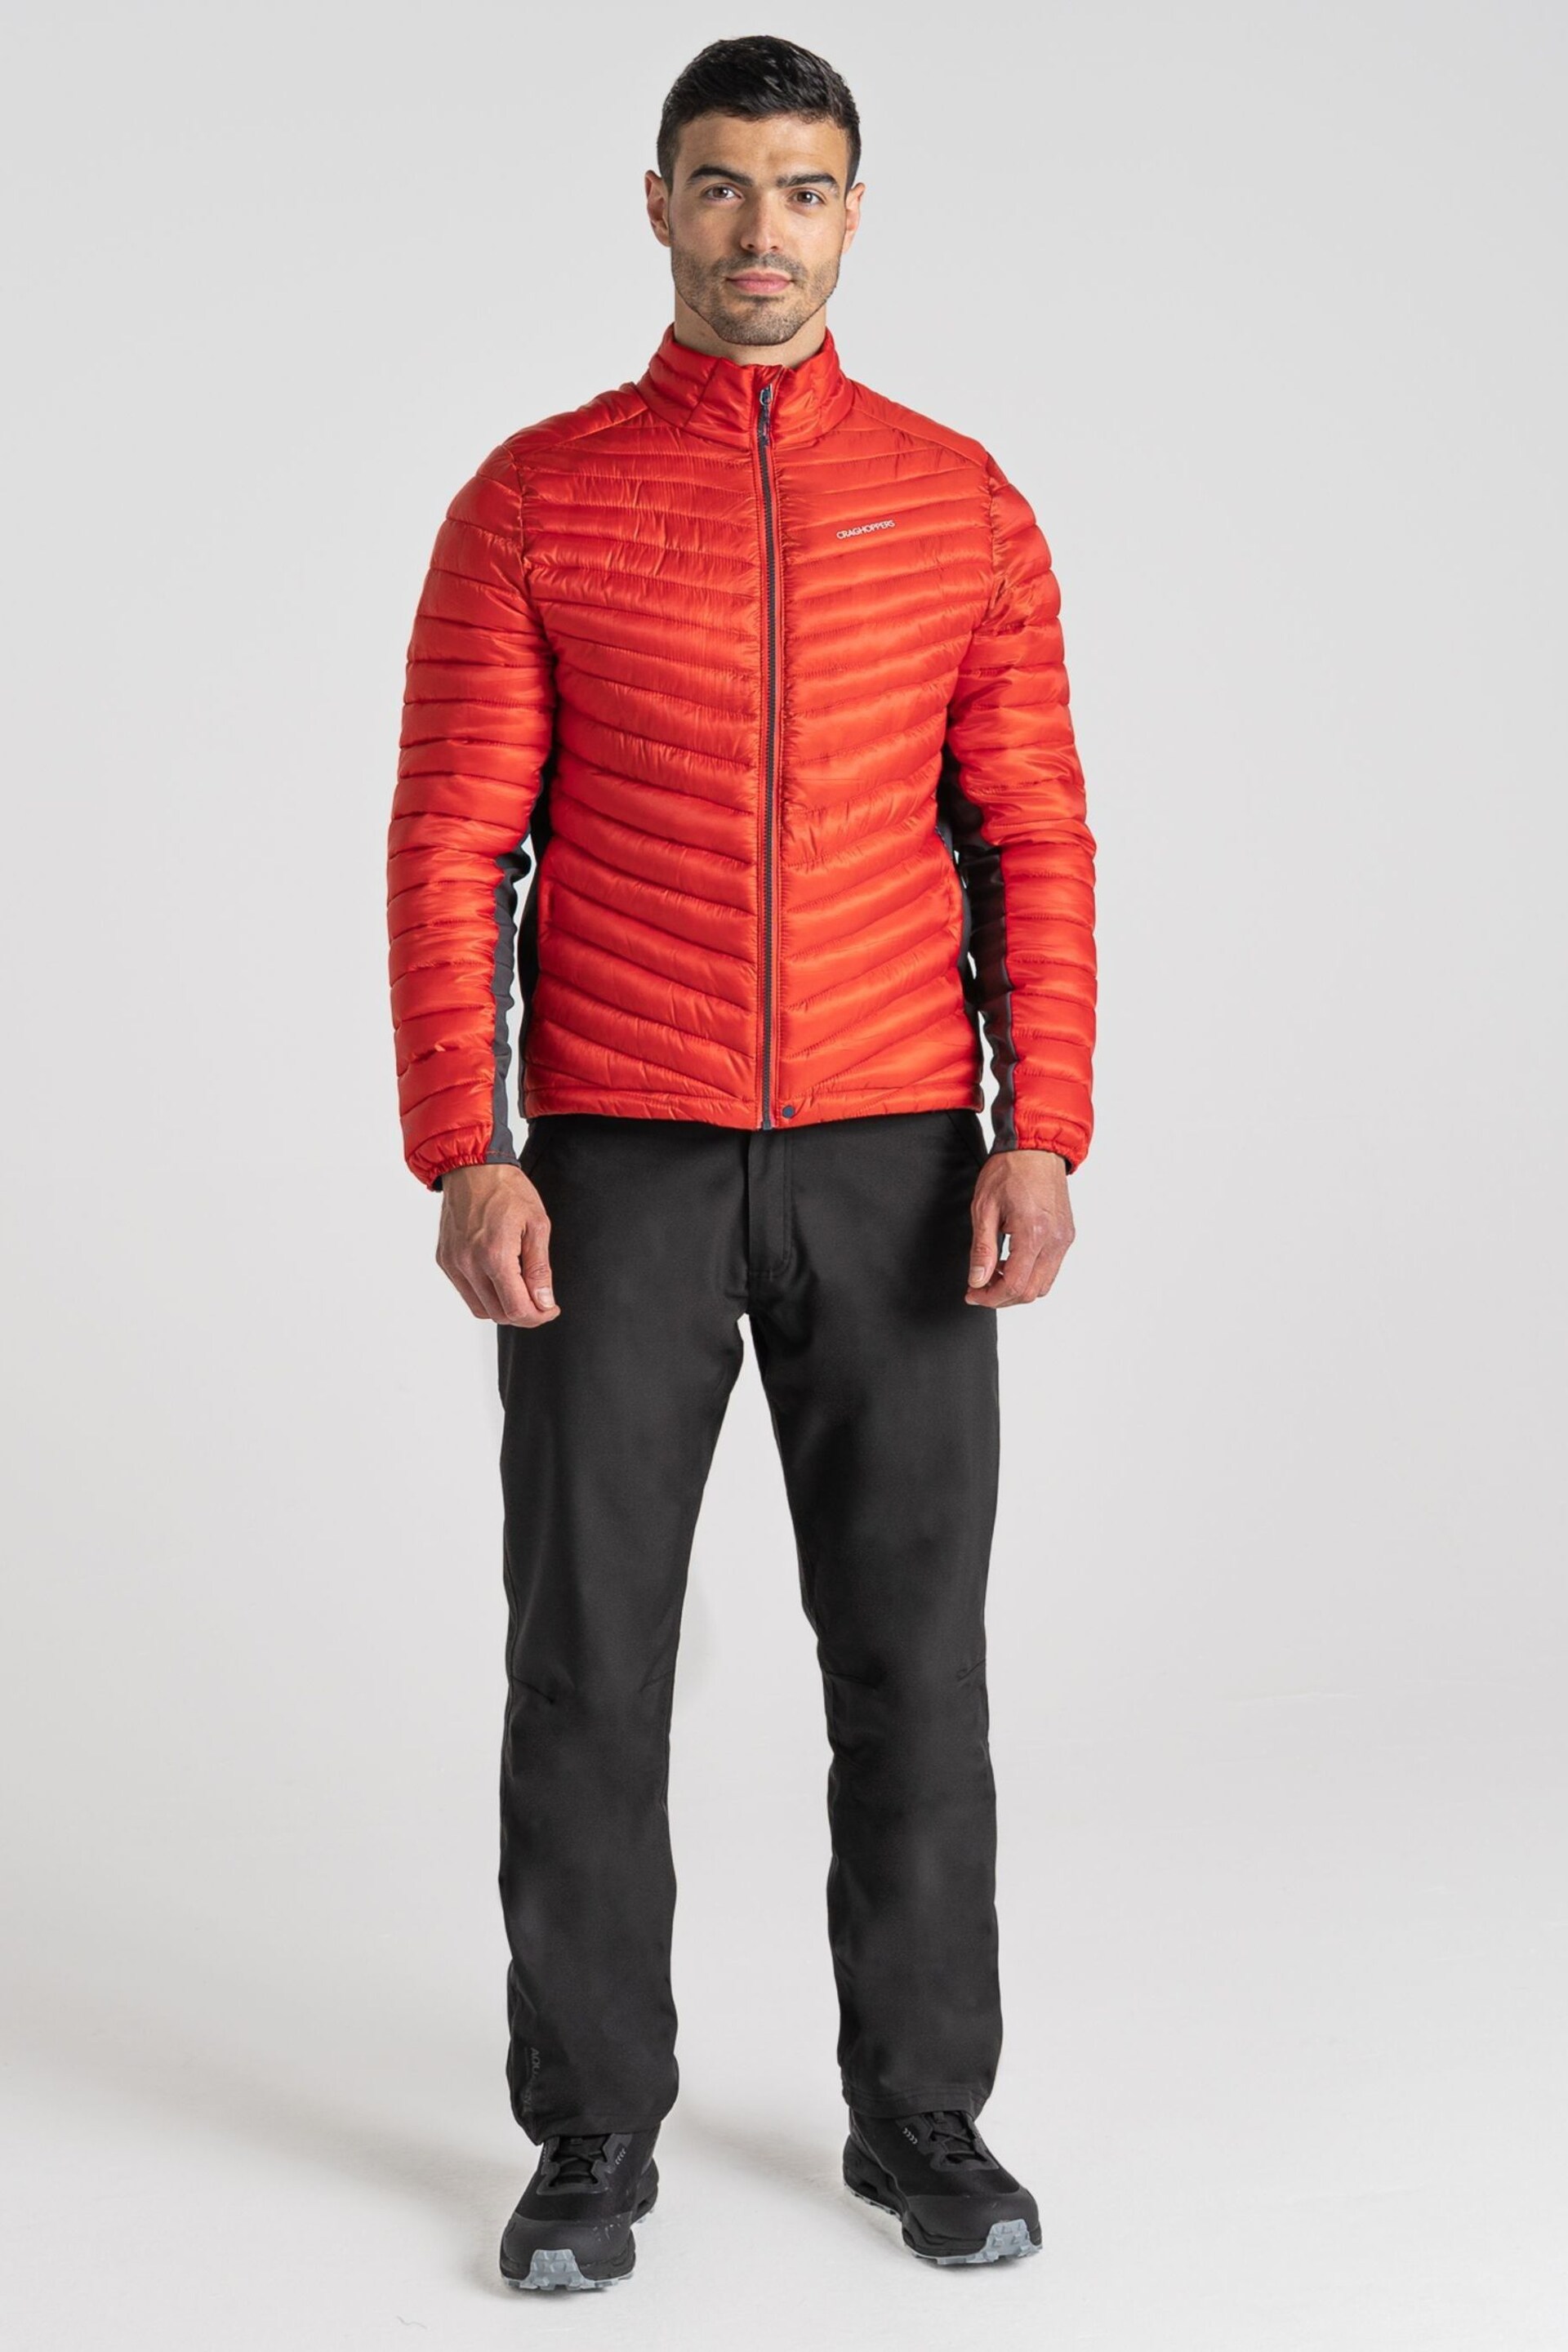 Craghoppers Black Steall Thermo Trousers - Image 1 of 6